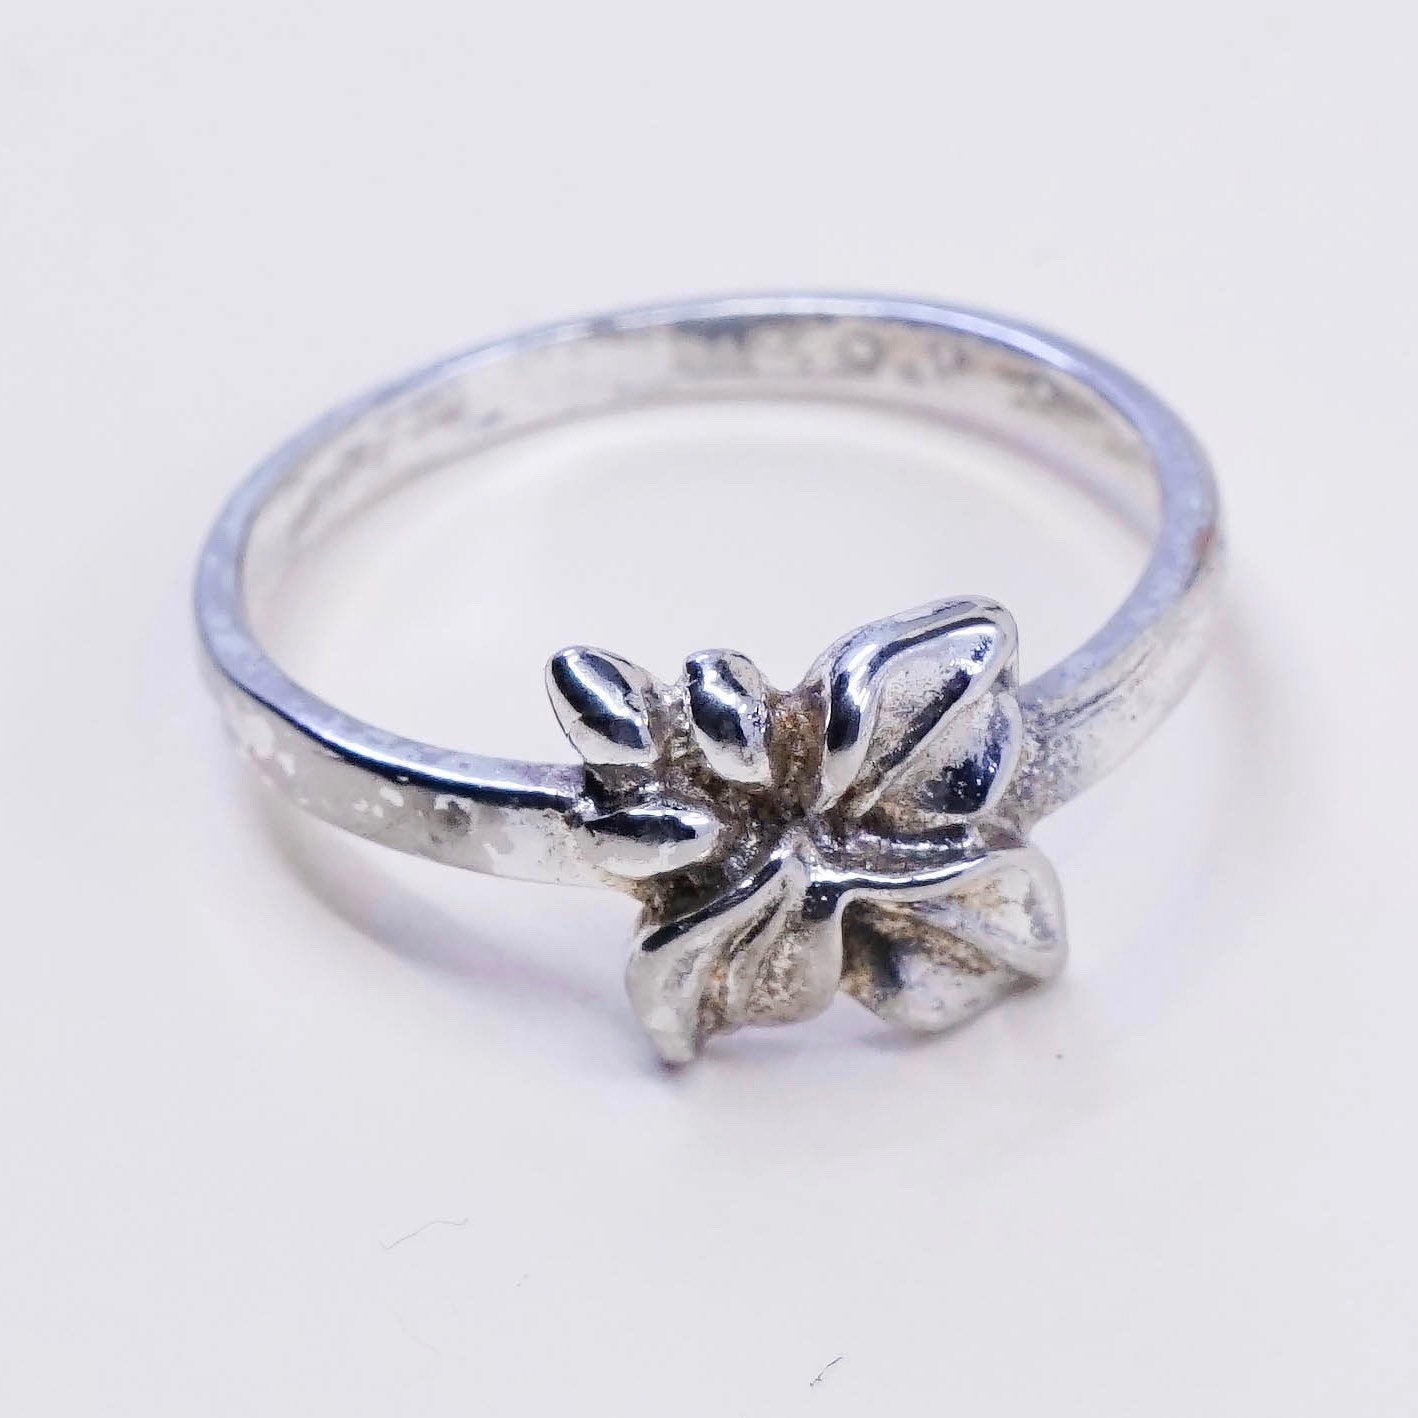 Size 7.25, vintage Sterling silver handmade ring, solid 925 silver with leaves